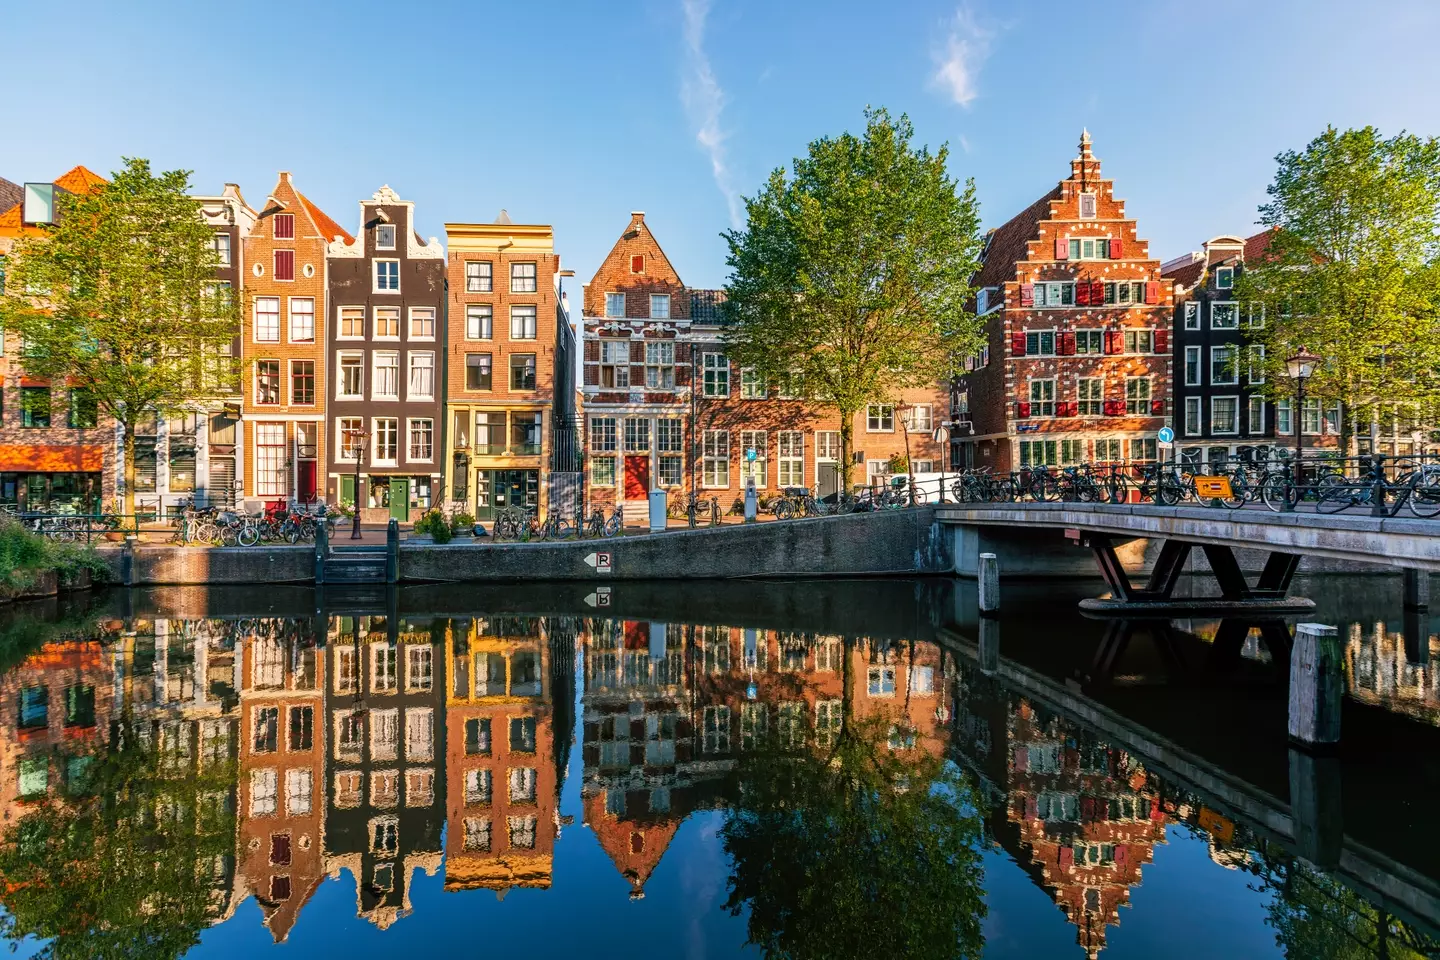 The fine city of Amsterdam, where that thing you heard about definitely didn't happen.